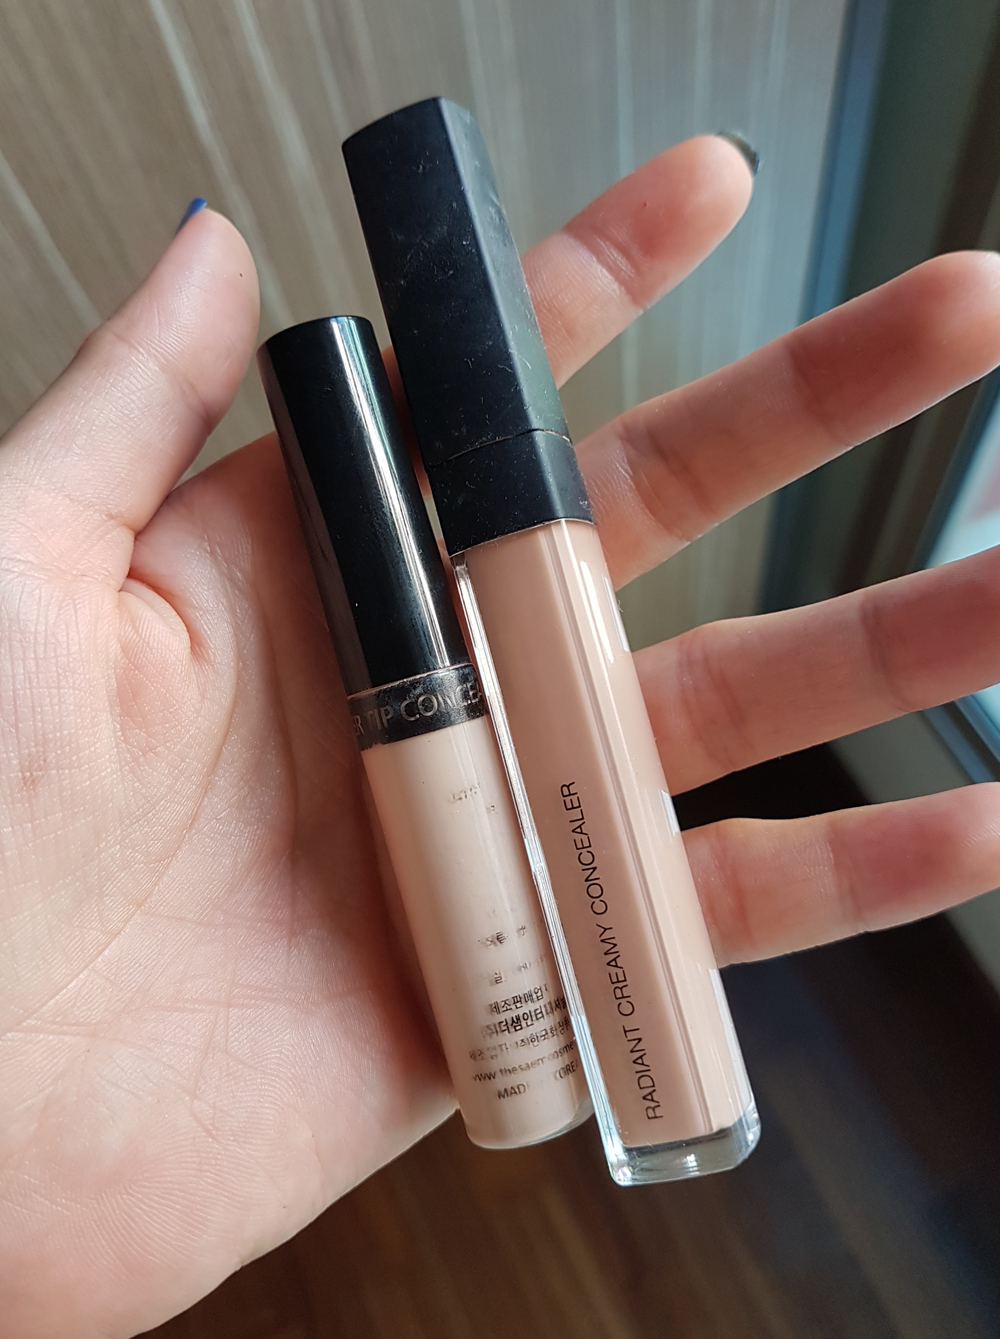 Make Up Review: The Saem Cover Perfection Tip Concealer in 1.5